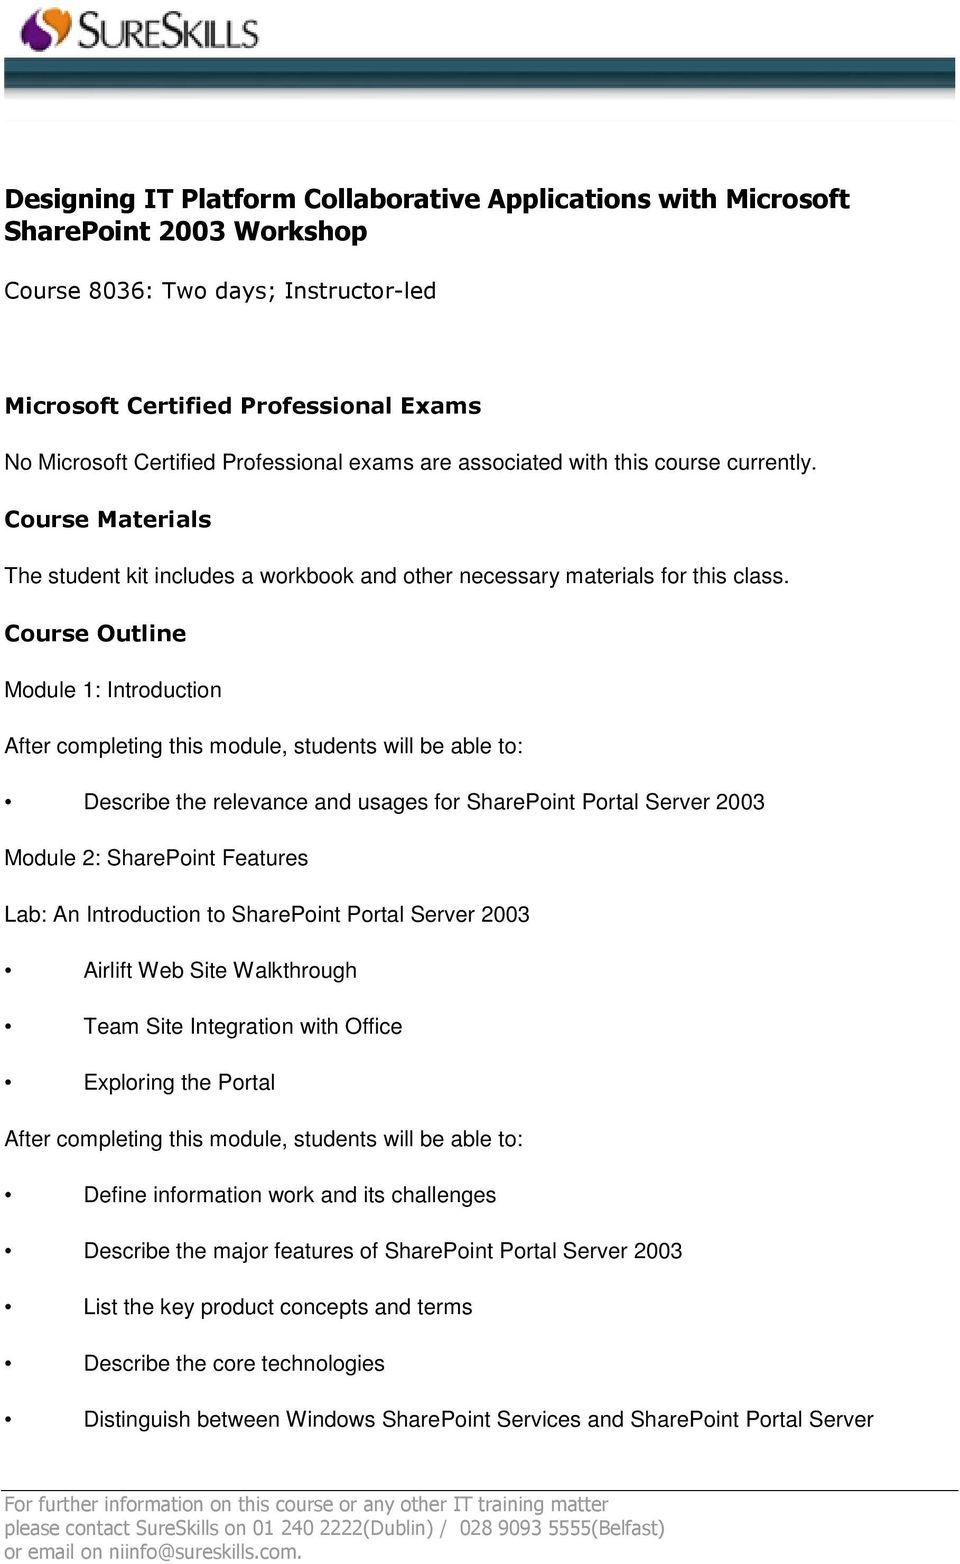 Course Outline Module 1: Introduction Describe the relevance and usages for SharePoint Portal Server 2003 Module 2: SharePoint Features Lab: An Introduction to SharePoint Portal Server 2003 Airlift